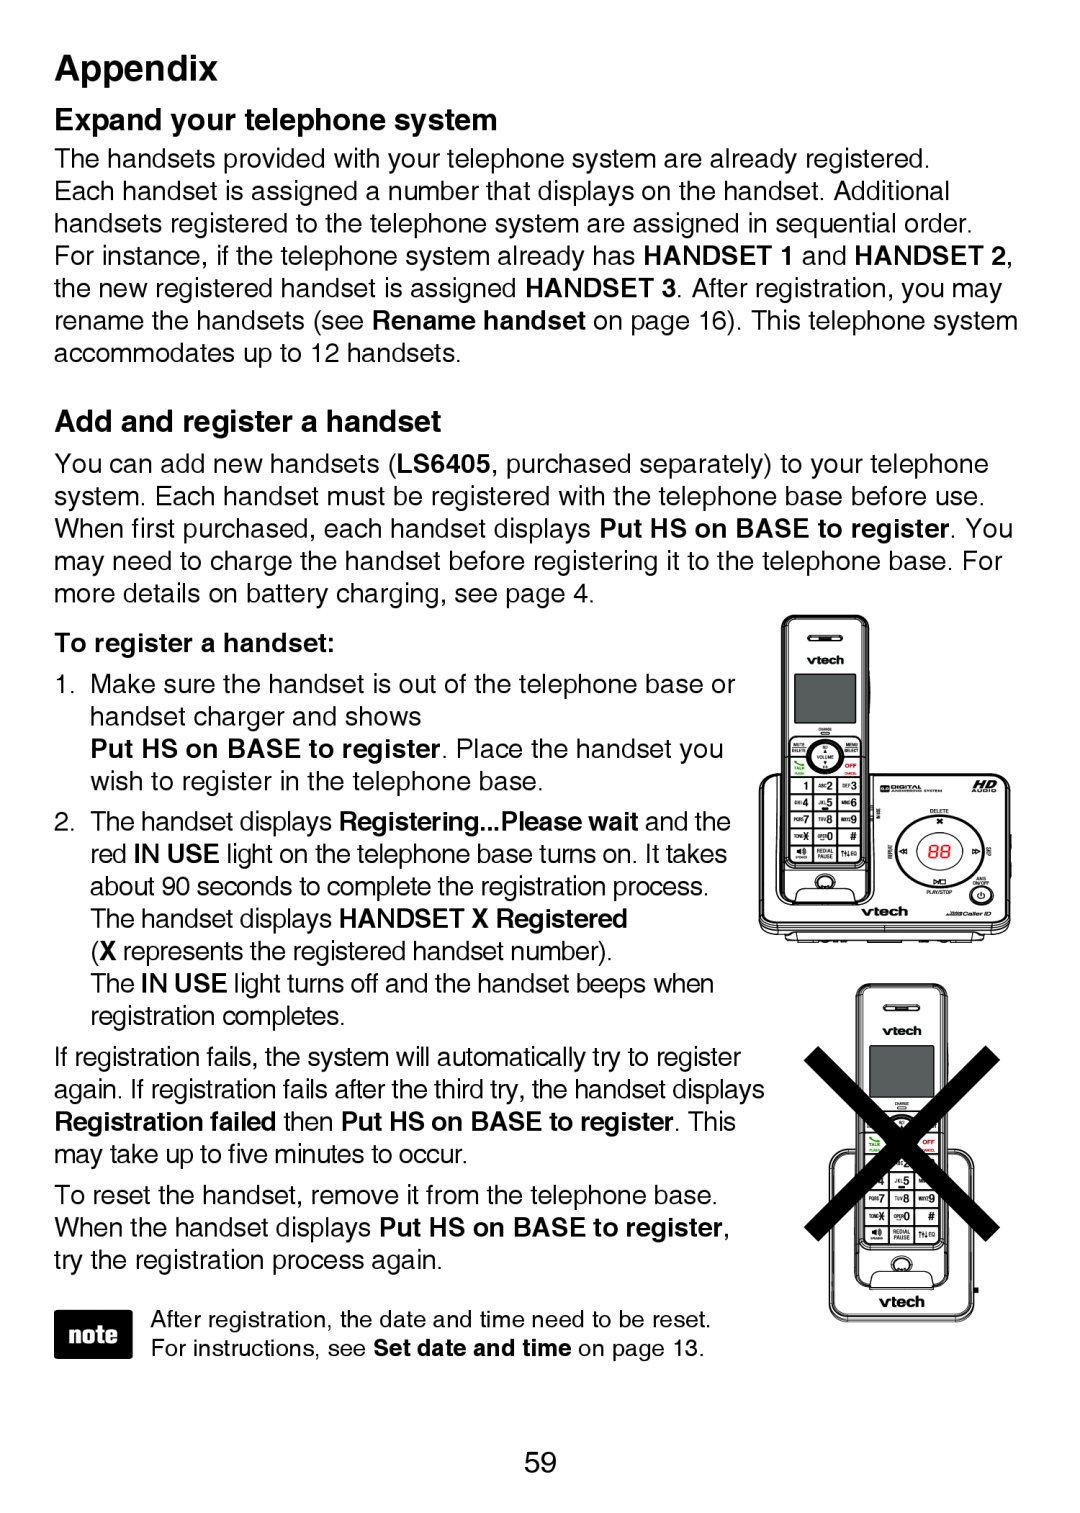 VTech LS6426-3, LS6425-4 Expand your telephone system, Add and register a handset, To register a handset, Appendix 